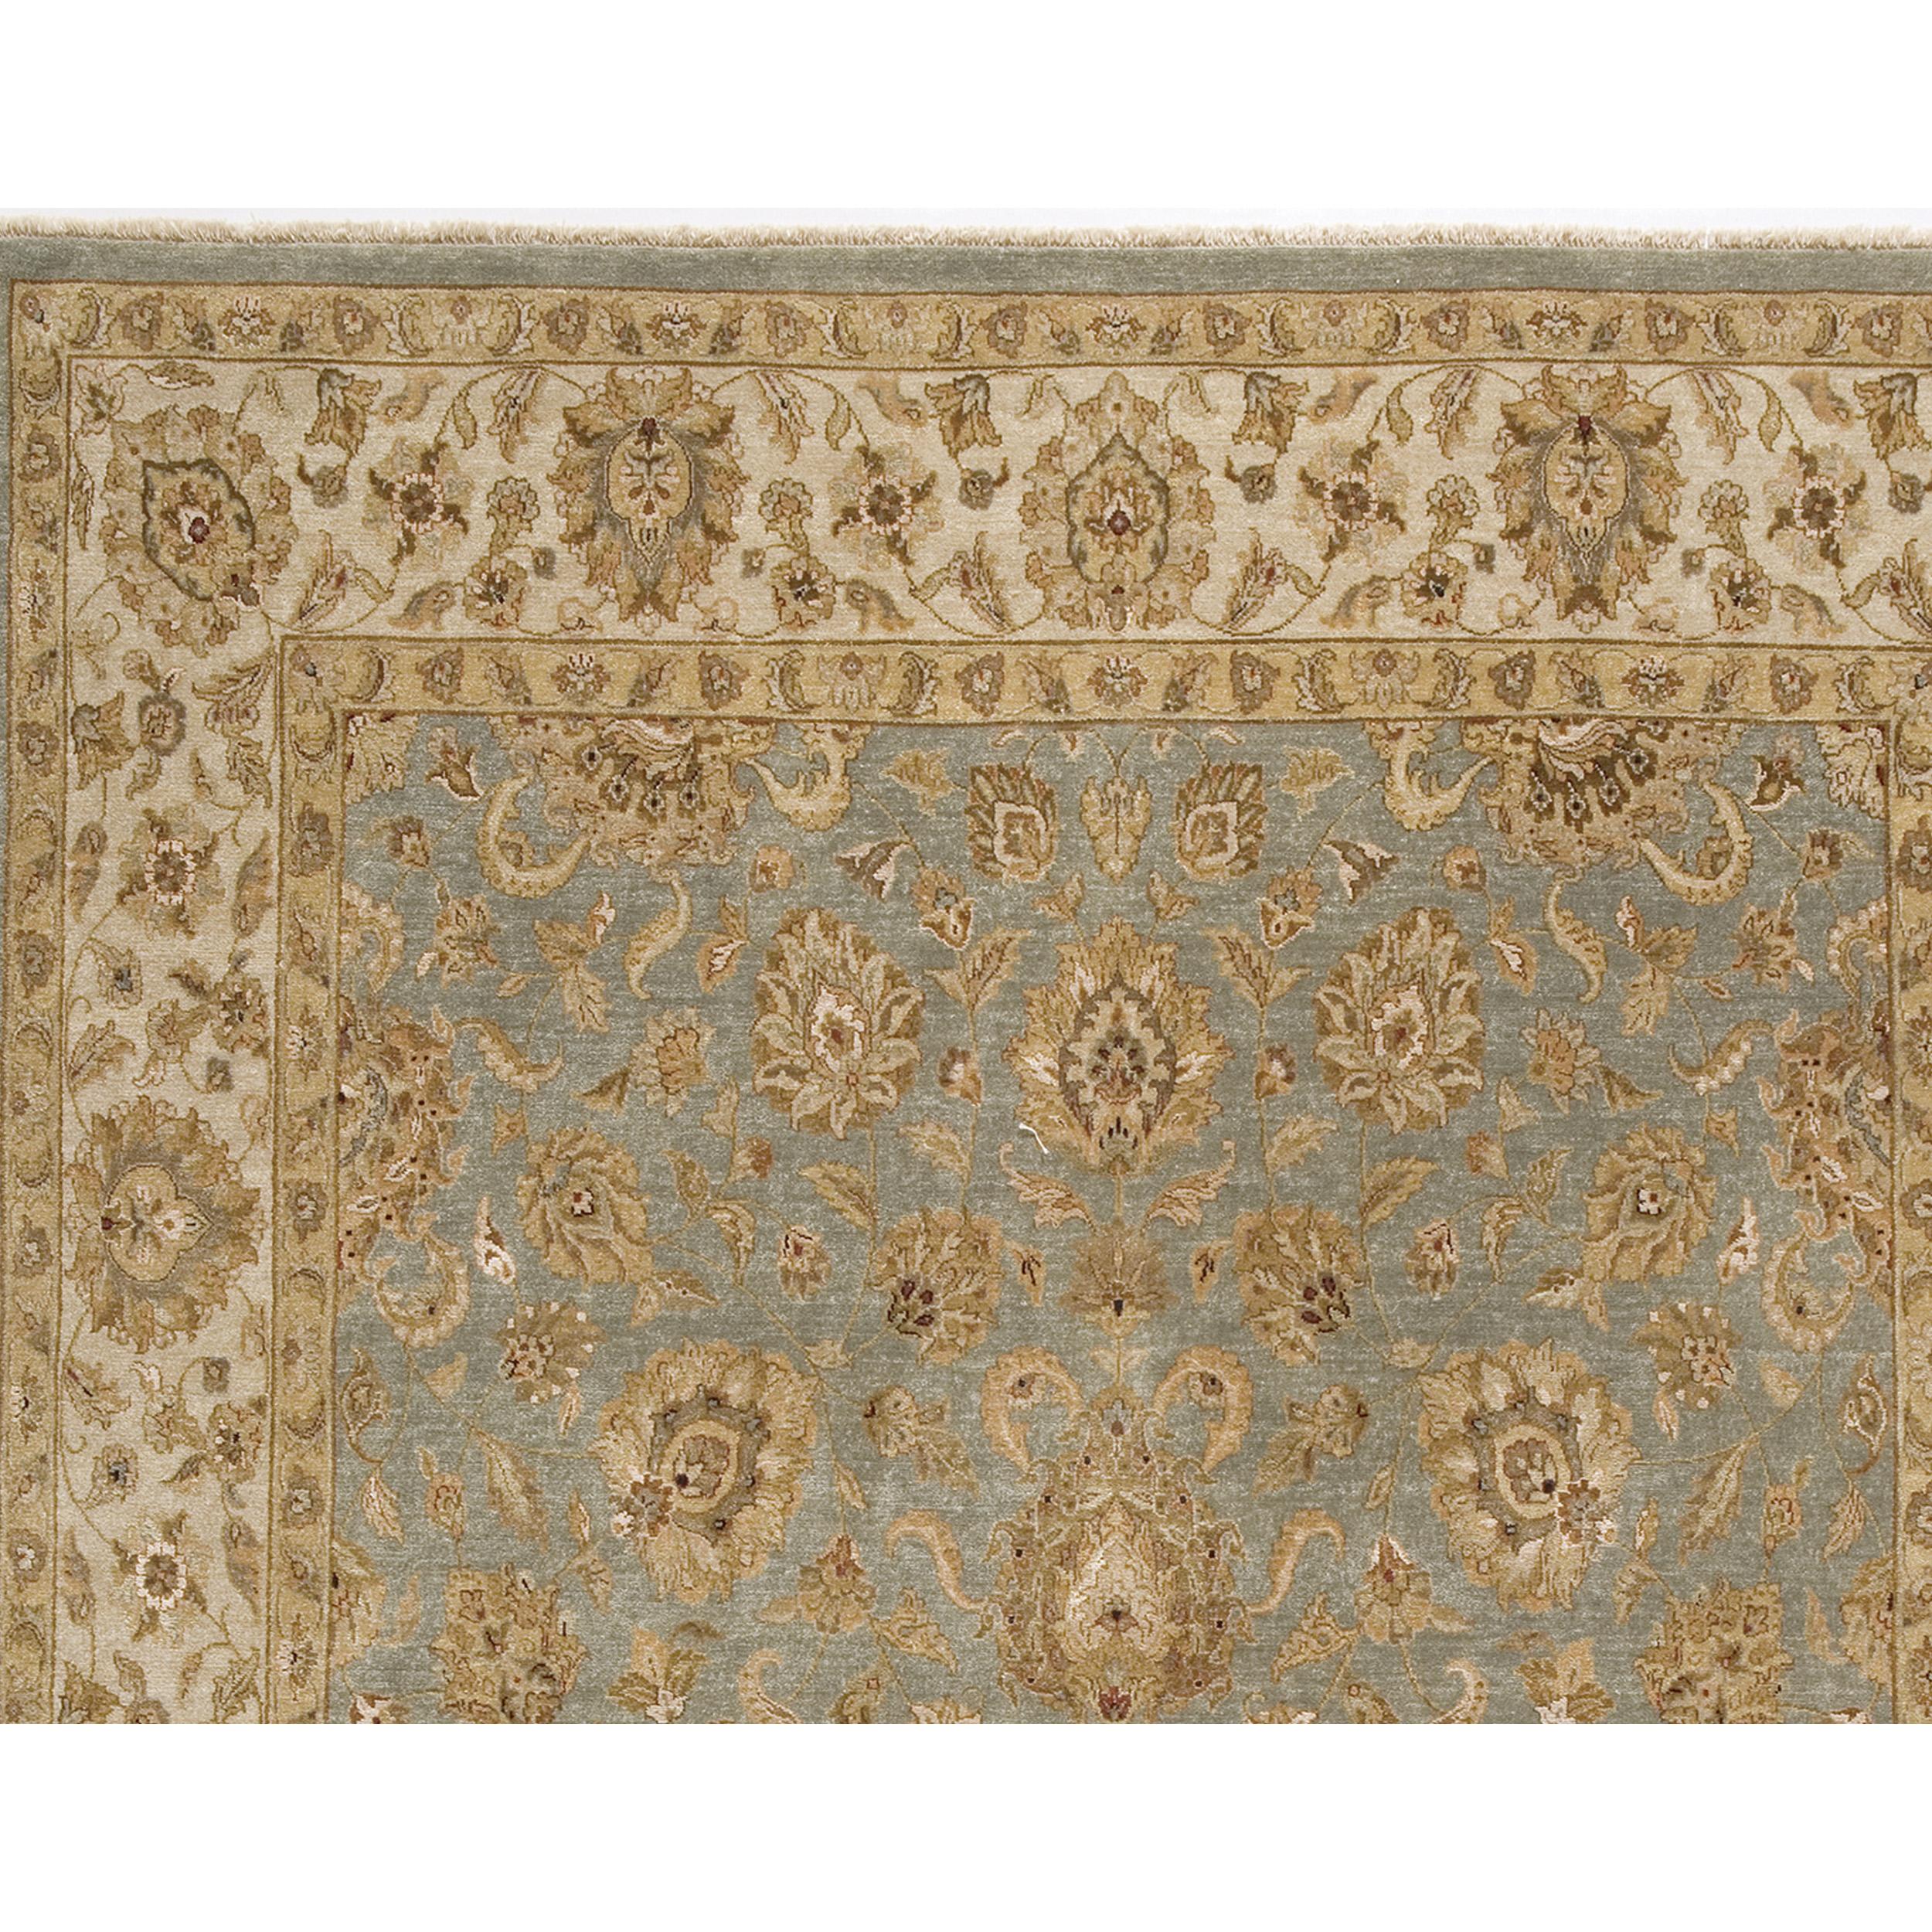 Every inch of this rug is meticulously hand-knotted by skilled artisans in India. The design reflects a traditional timeless aesthetic. Crafted from a harmonious blend of silk and sumptuous wool made up of yarn that is brilliantly colored using